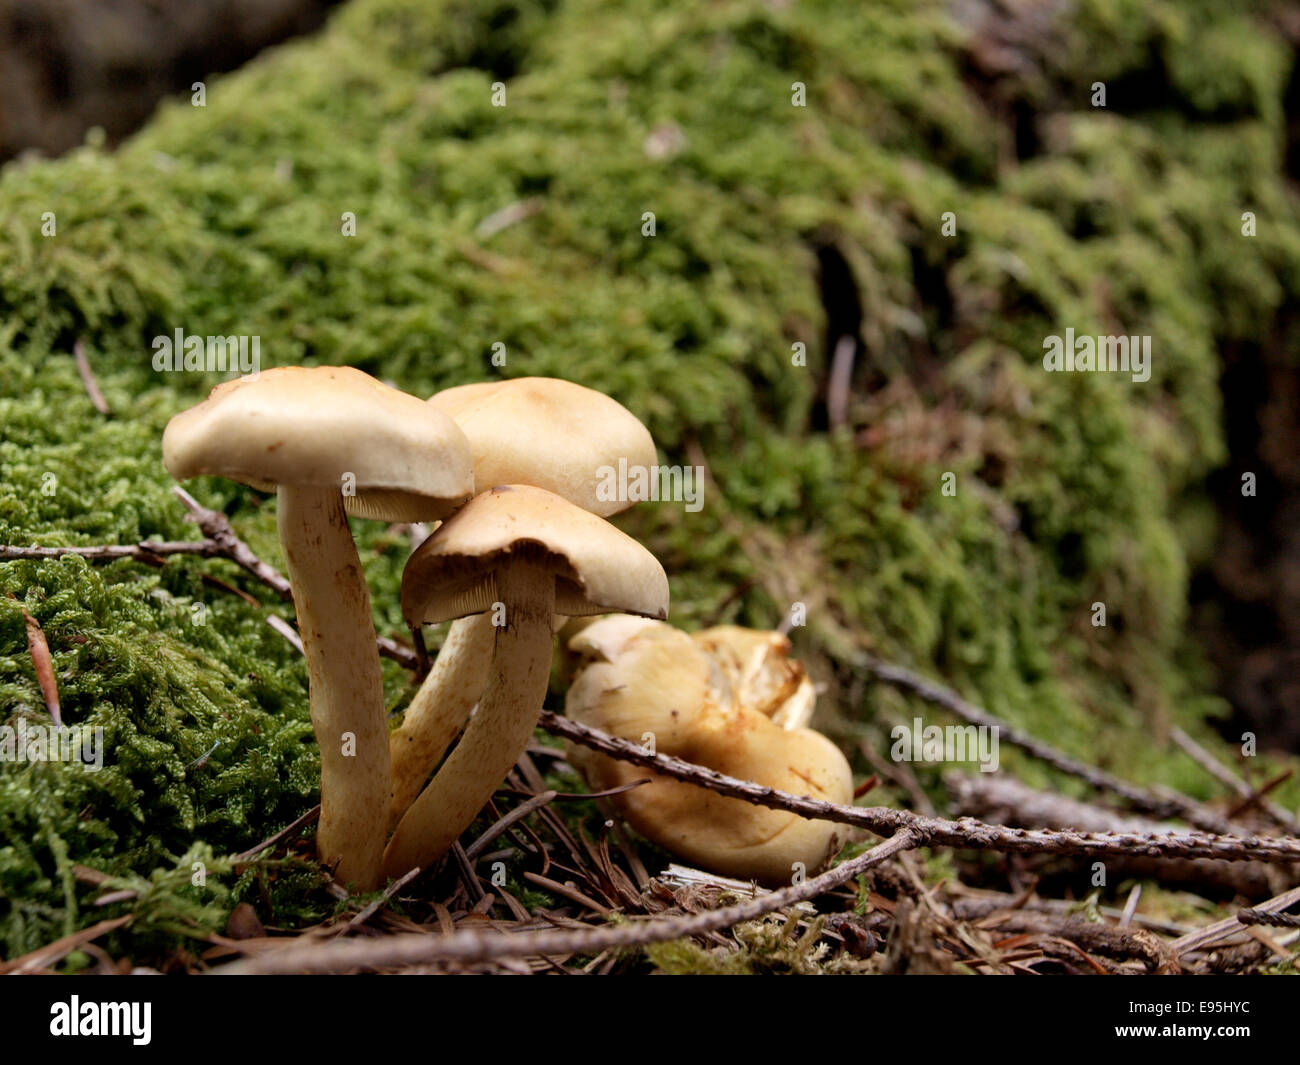 Fungus growing on a decaying tree trunk, A members of the genus Pholiota, wood-rotting saprobes fungi, Dorset, UK Stock Photo